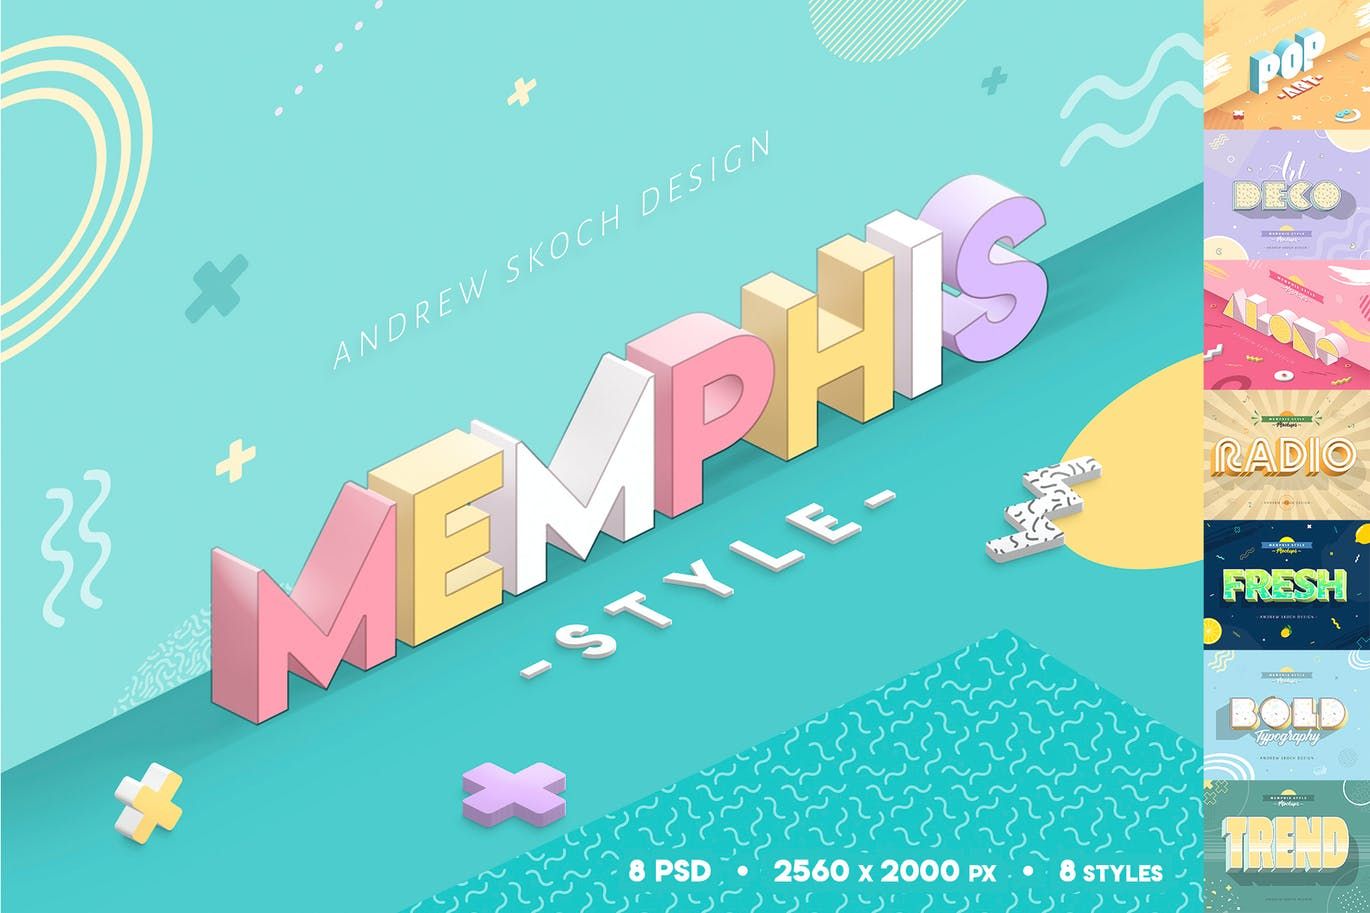 A memphis style text effects for photoshop